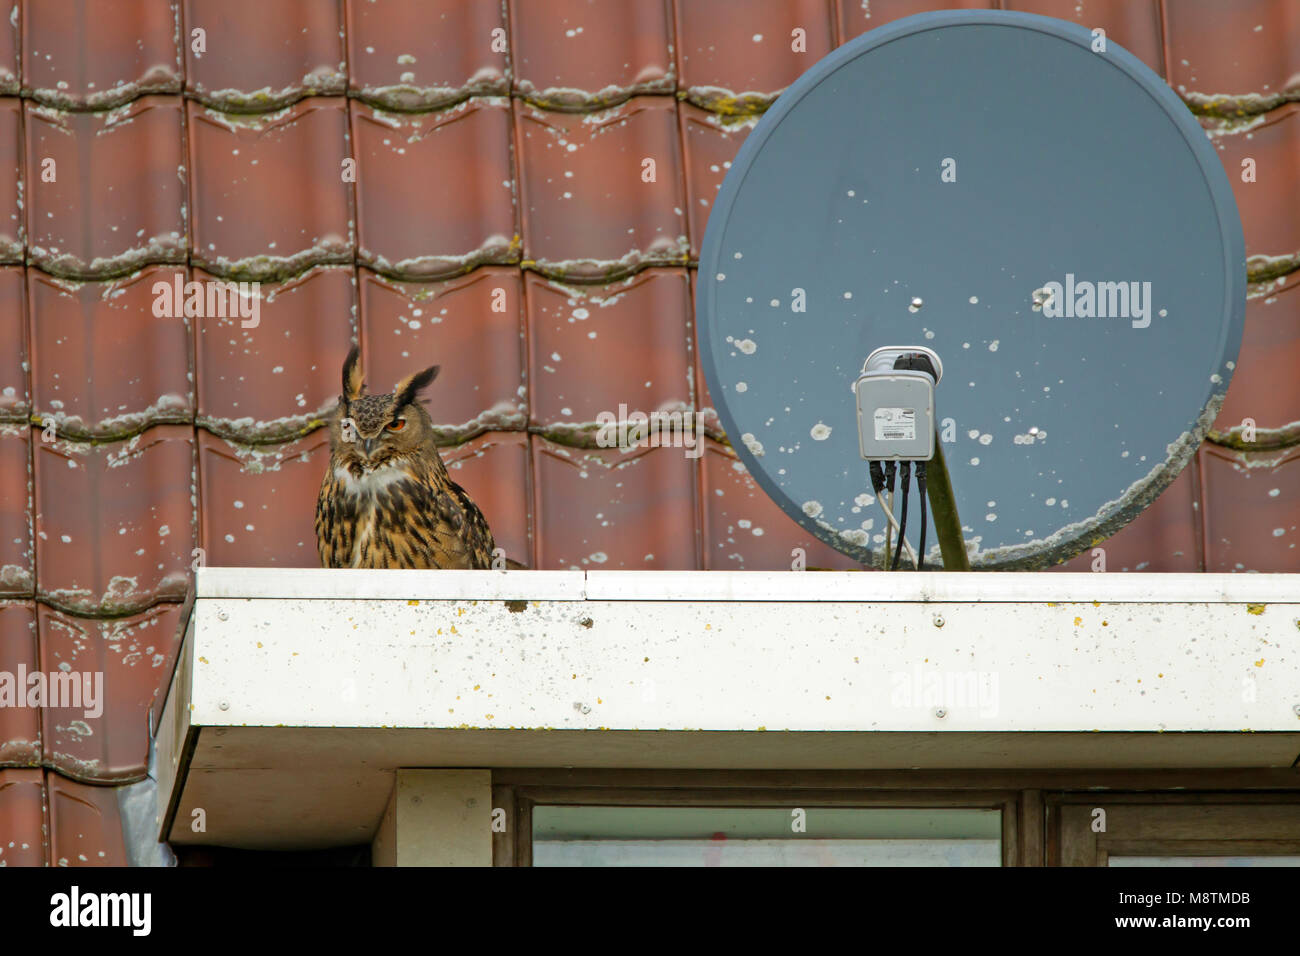 Oehoe zittend op dak naast schotelantenne; Eurasian Eagle-Owl perched on roof next to satellite dish Stock Photo